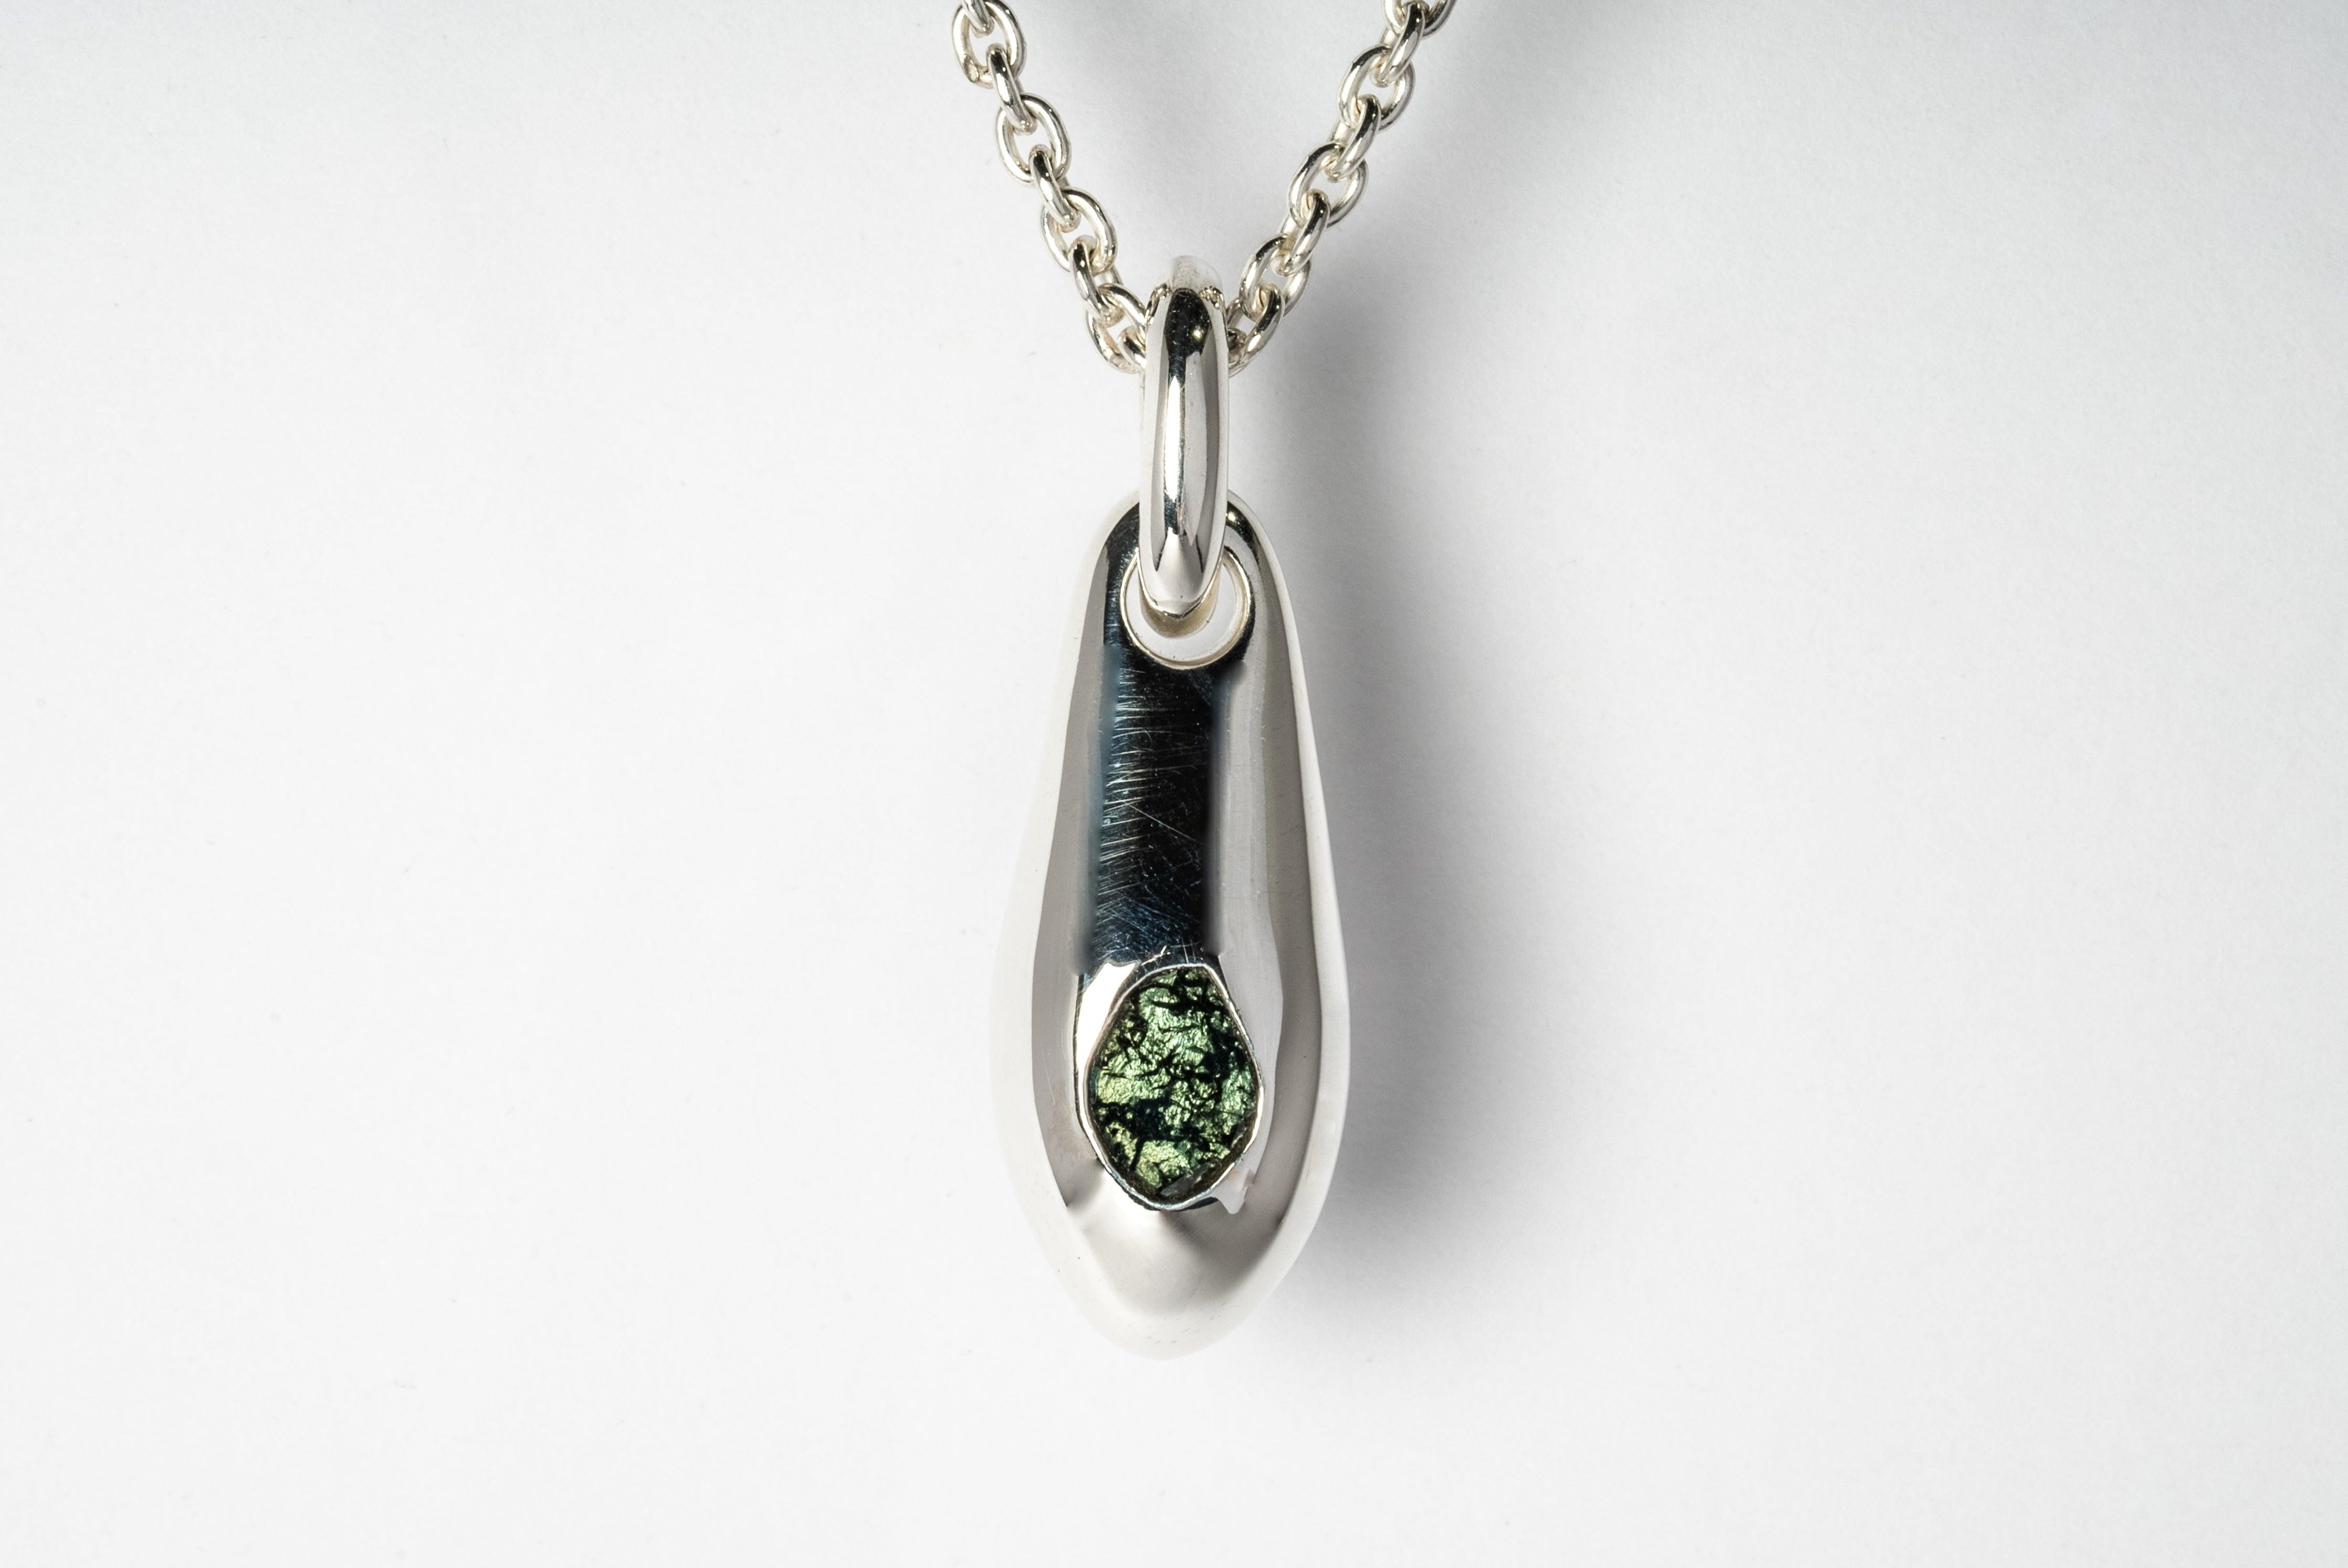 This necklace is made with a naturally occurring element and will vary from the photograph you see. Each piece is unique and this is what makes it special.
Made in polished sterling silver with a blue diamond slab. Total chain length : 74cm 

